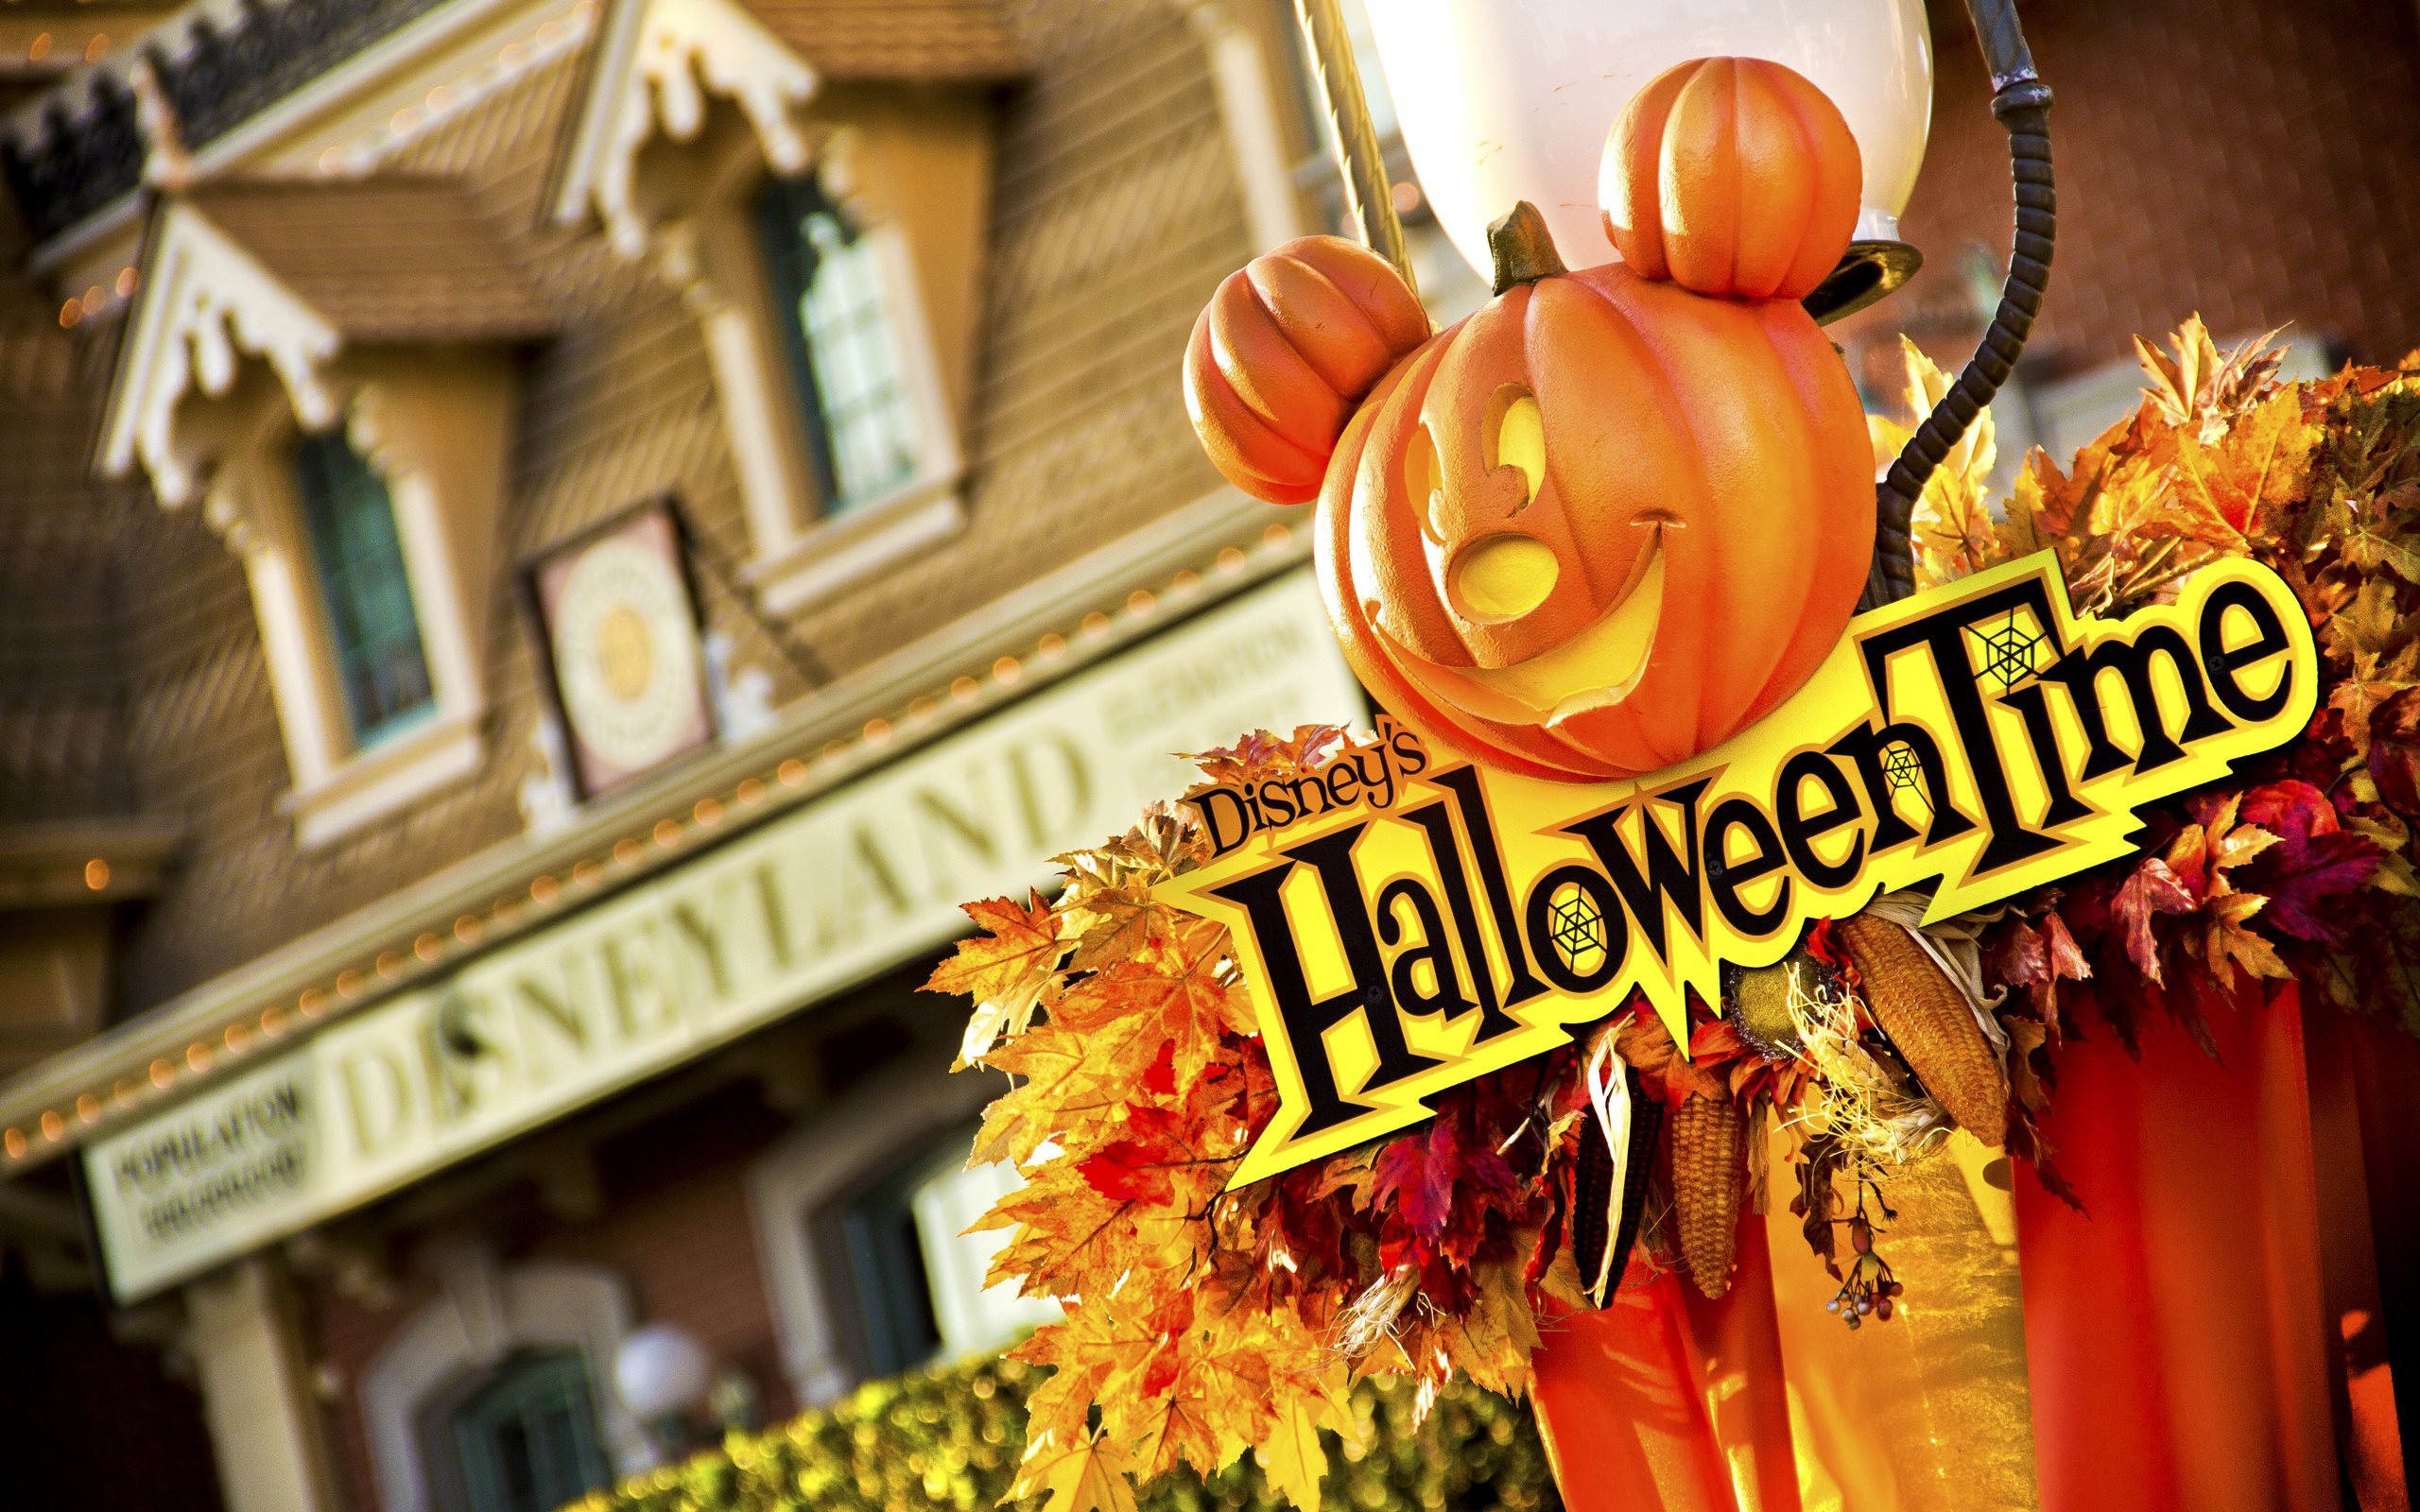 Download Wallpapers Halloween Pumpkin House Disney For Desktop With Resolution 2560x1600 High Quality Hd Pictures Wallpapers